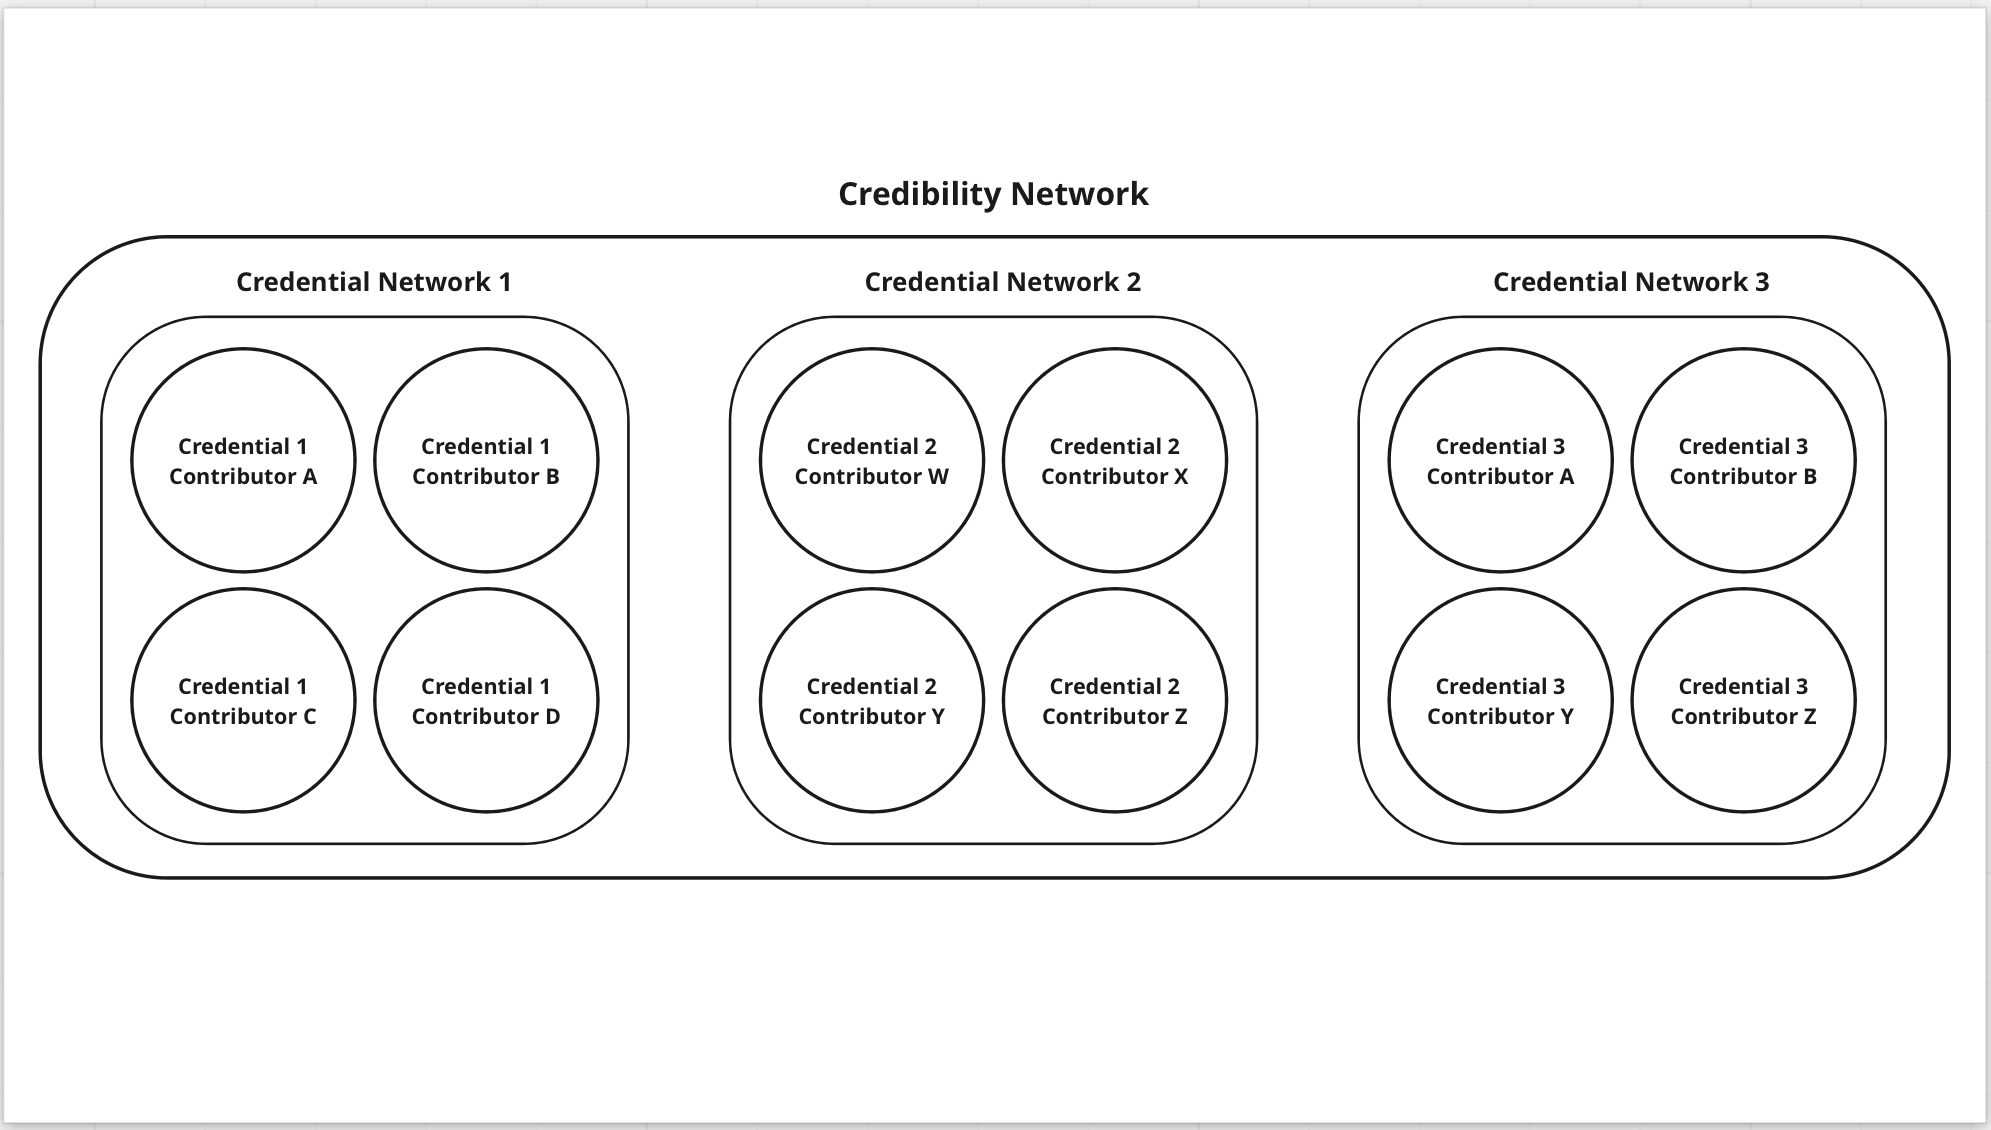 Fig 3. Credibility Network